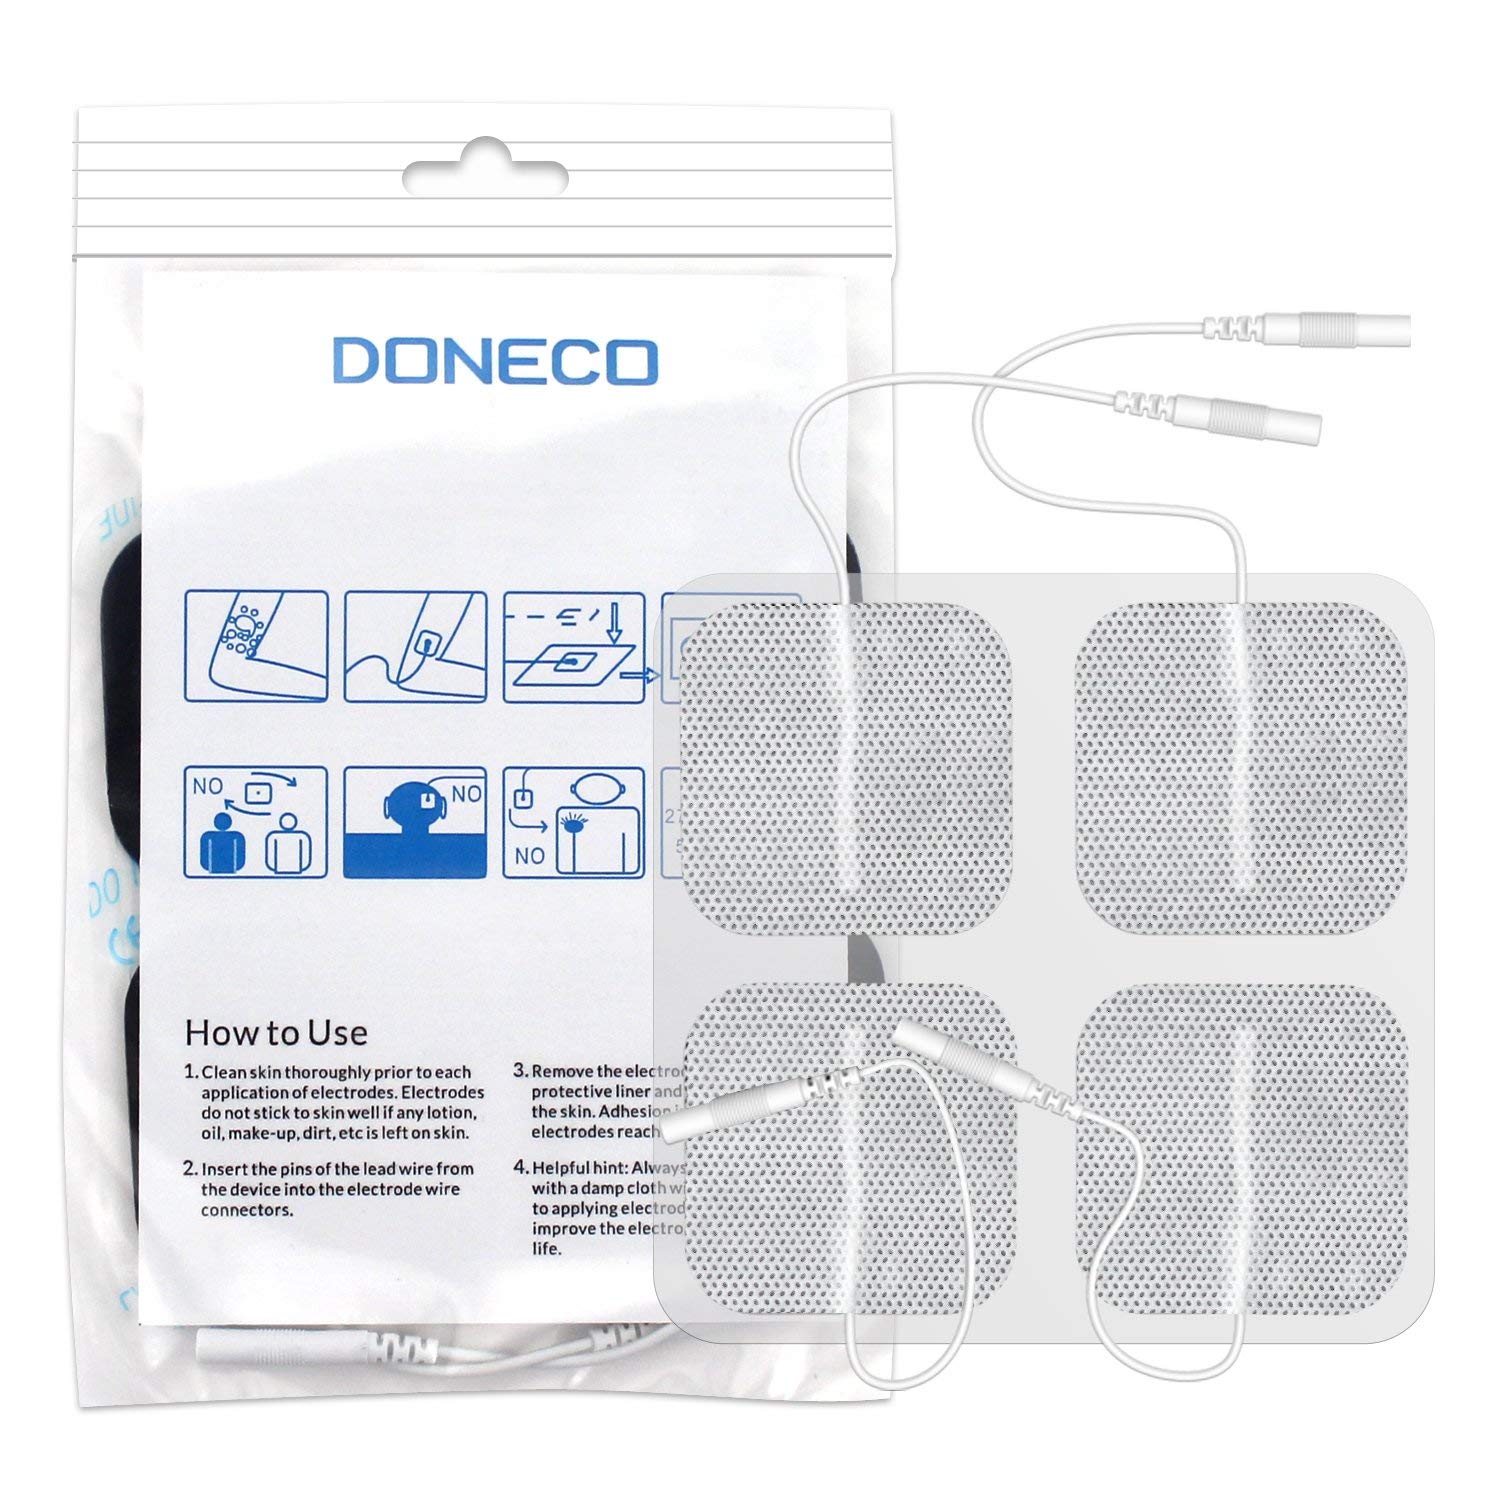 DONECO 2" Square TENS Unit Electrodes 48 Pack Electro Pads for TENS Therapy